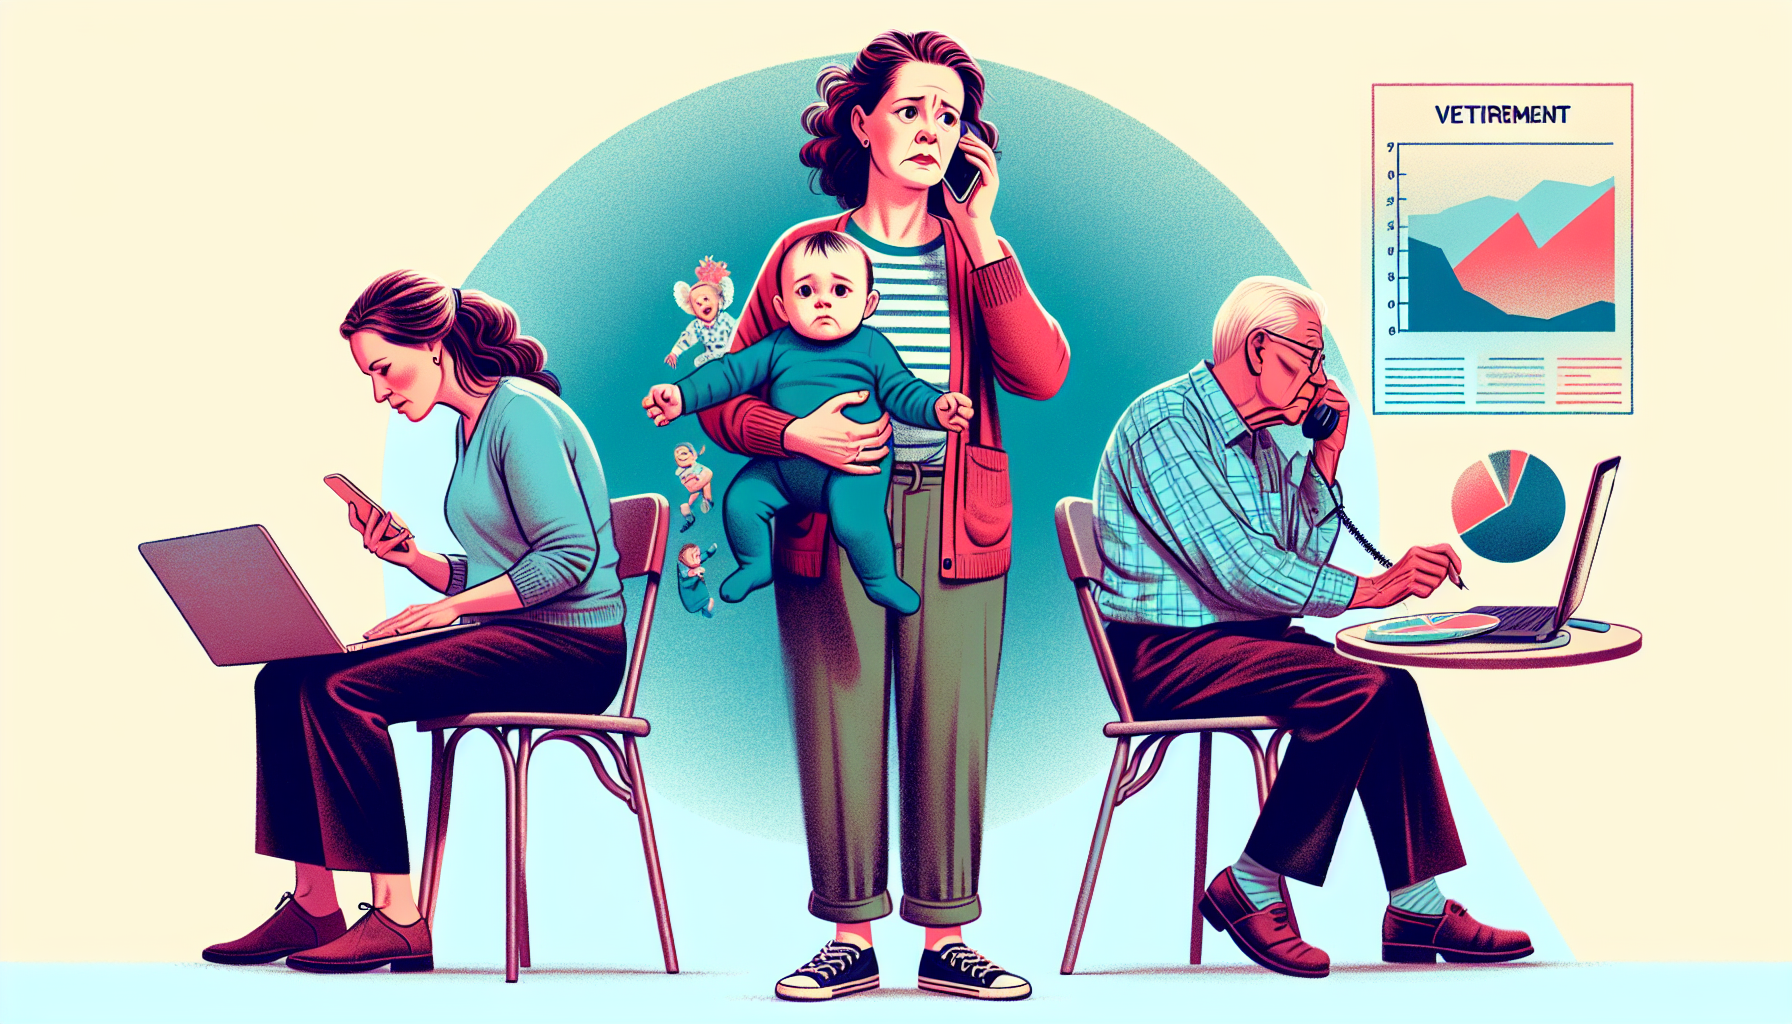 A Gen X woman multitasking between caring for children, aging parents, and retirement planning